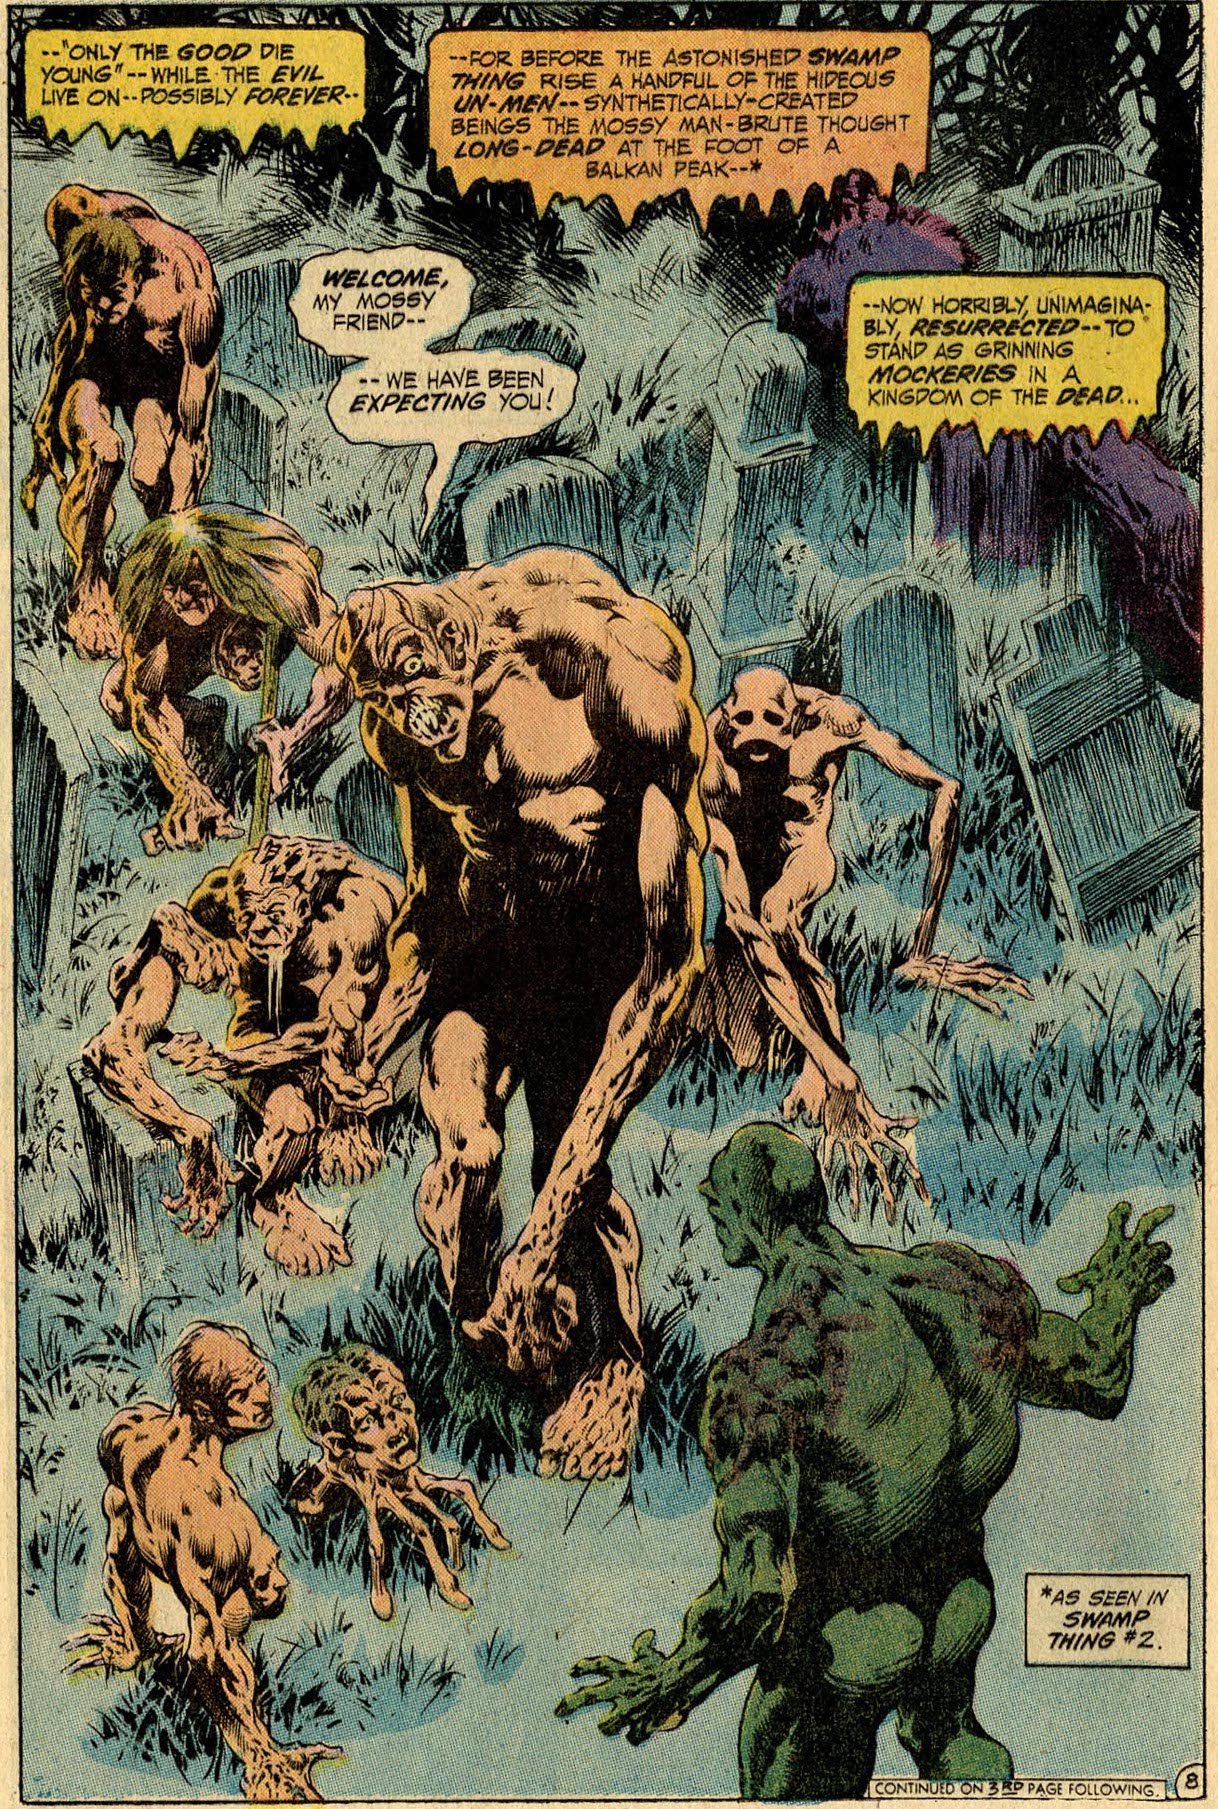 Hello, old enemy. Anton Arcane, back from the dead the first time in Swamp Thing #10, by Len Wein and Bernie Wrightson